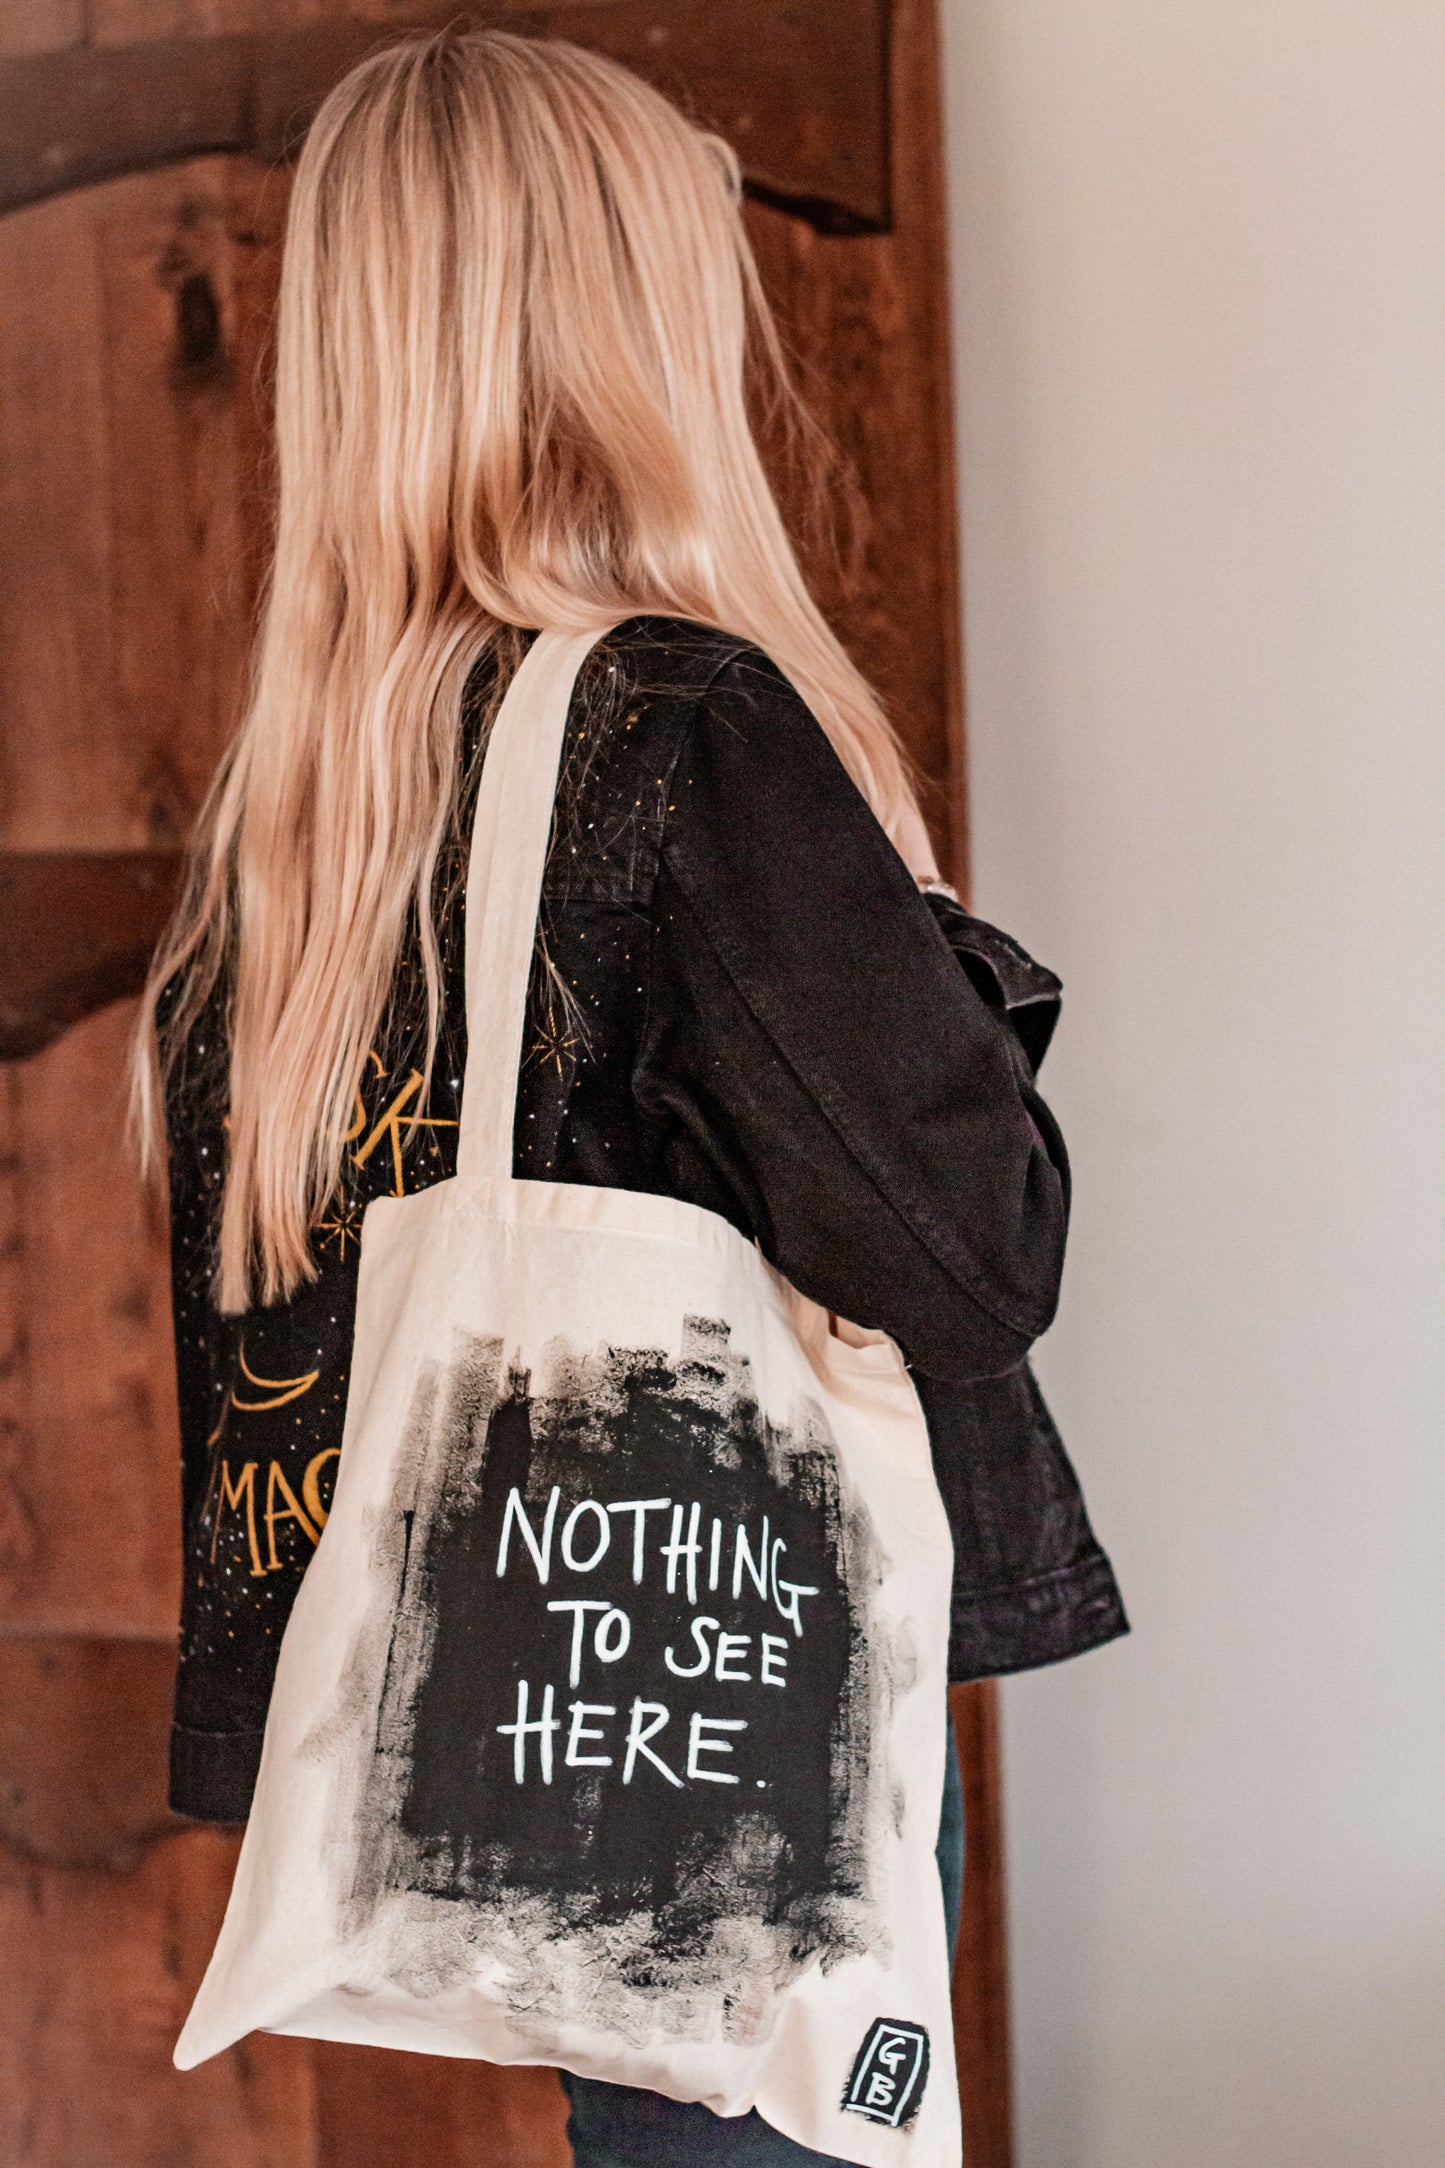 ‘Nothing to see here’ cotton tote bag